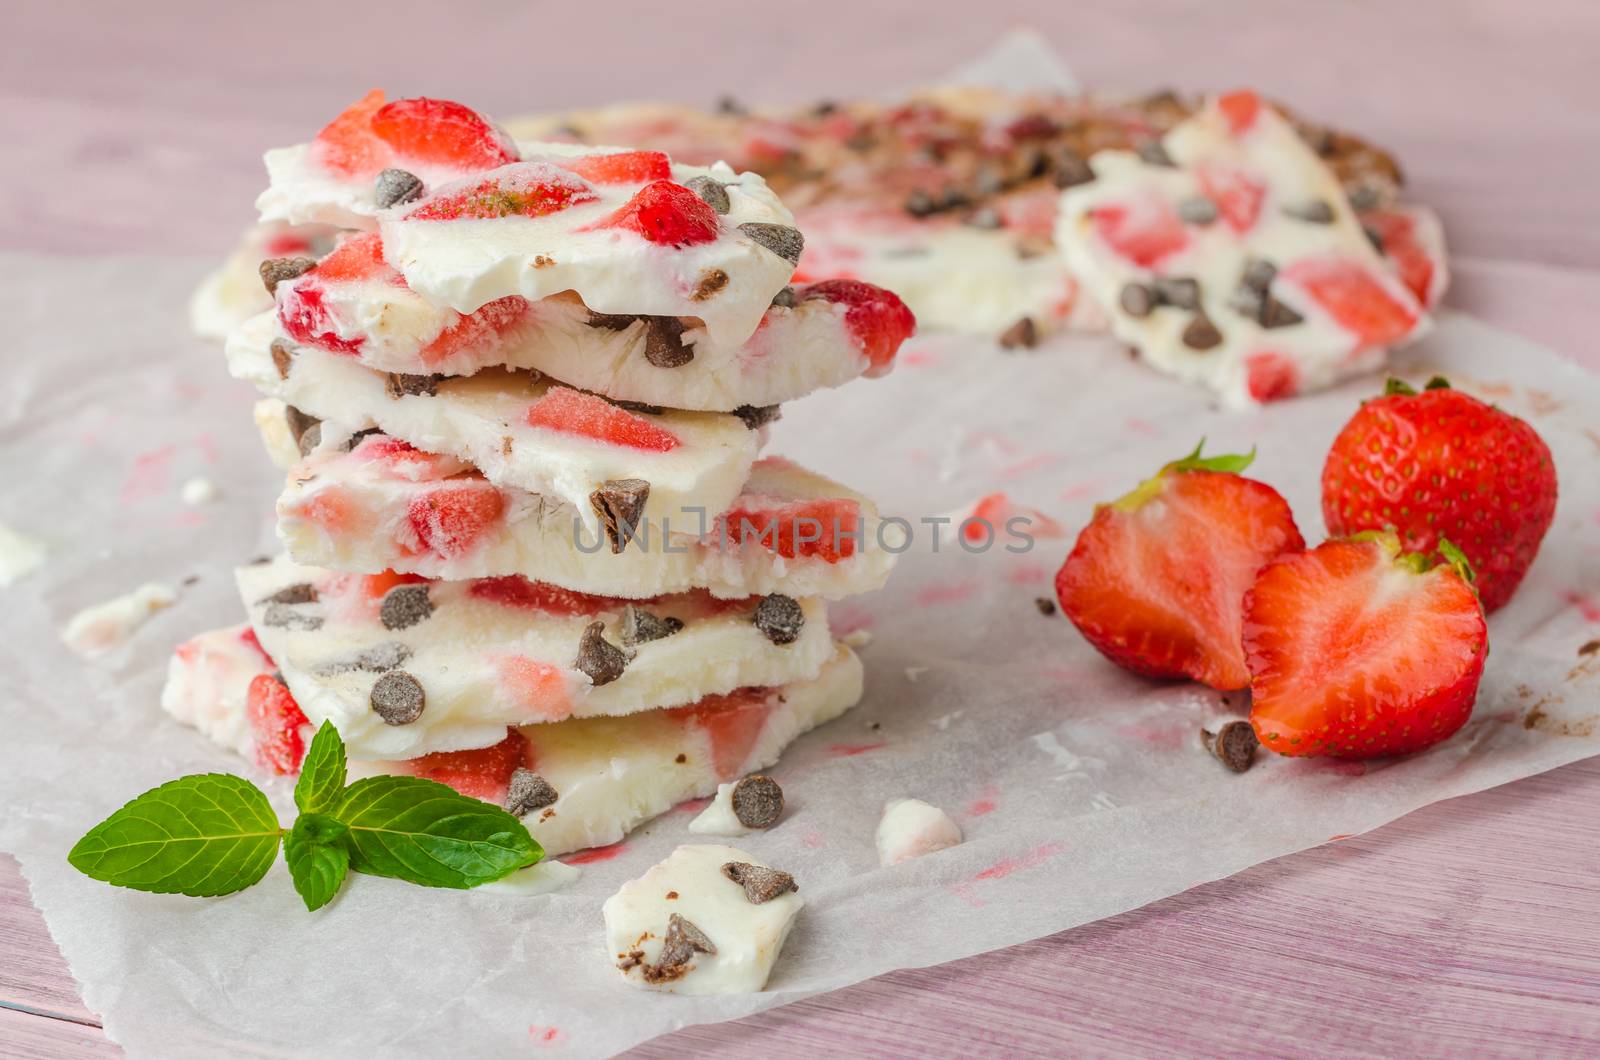 Homemade healthy frozen strawberry yogurt bark on rustic wooden  by AnaMarques